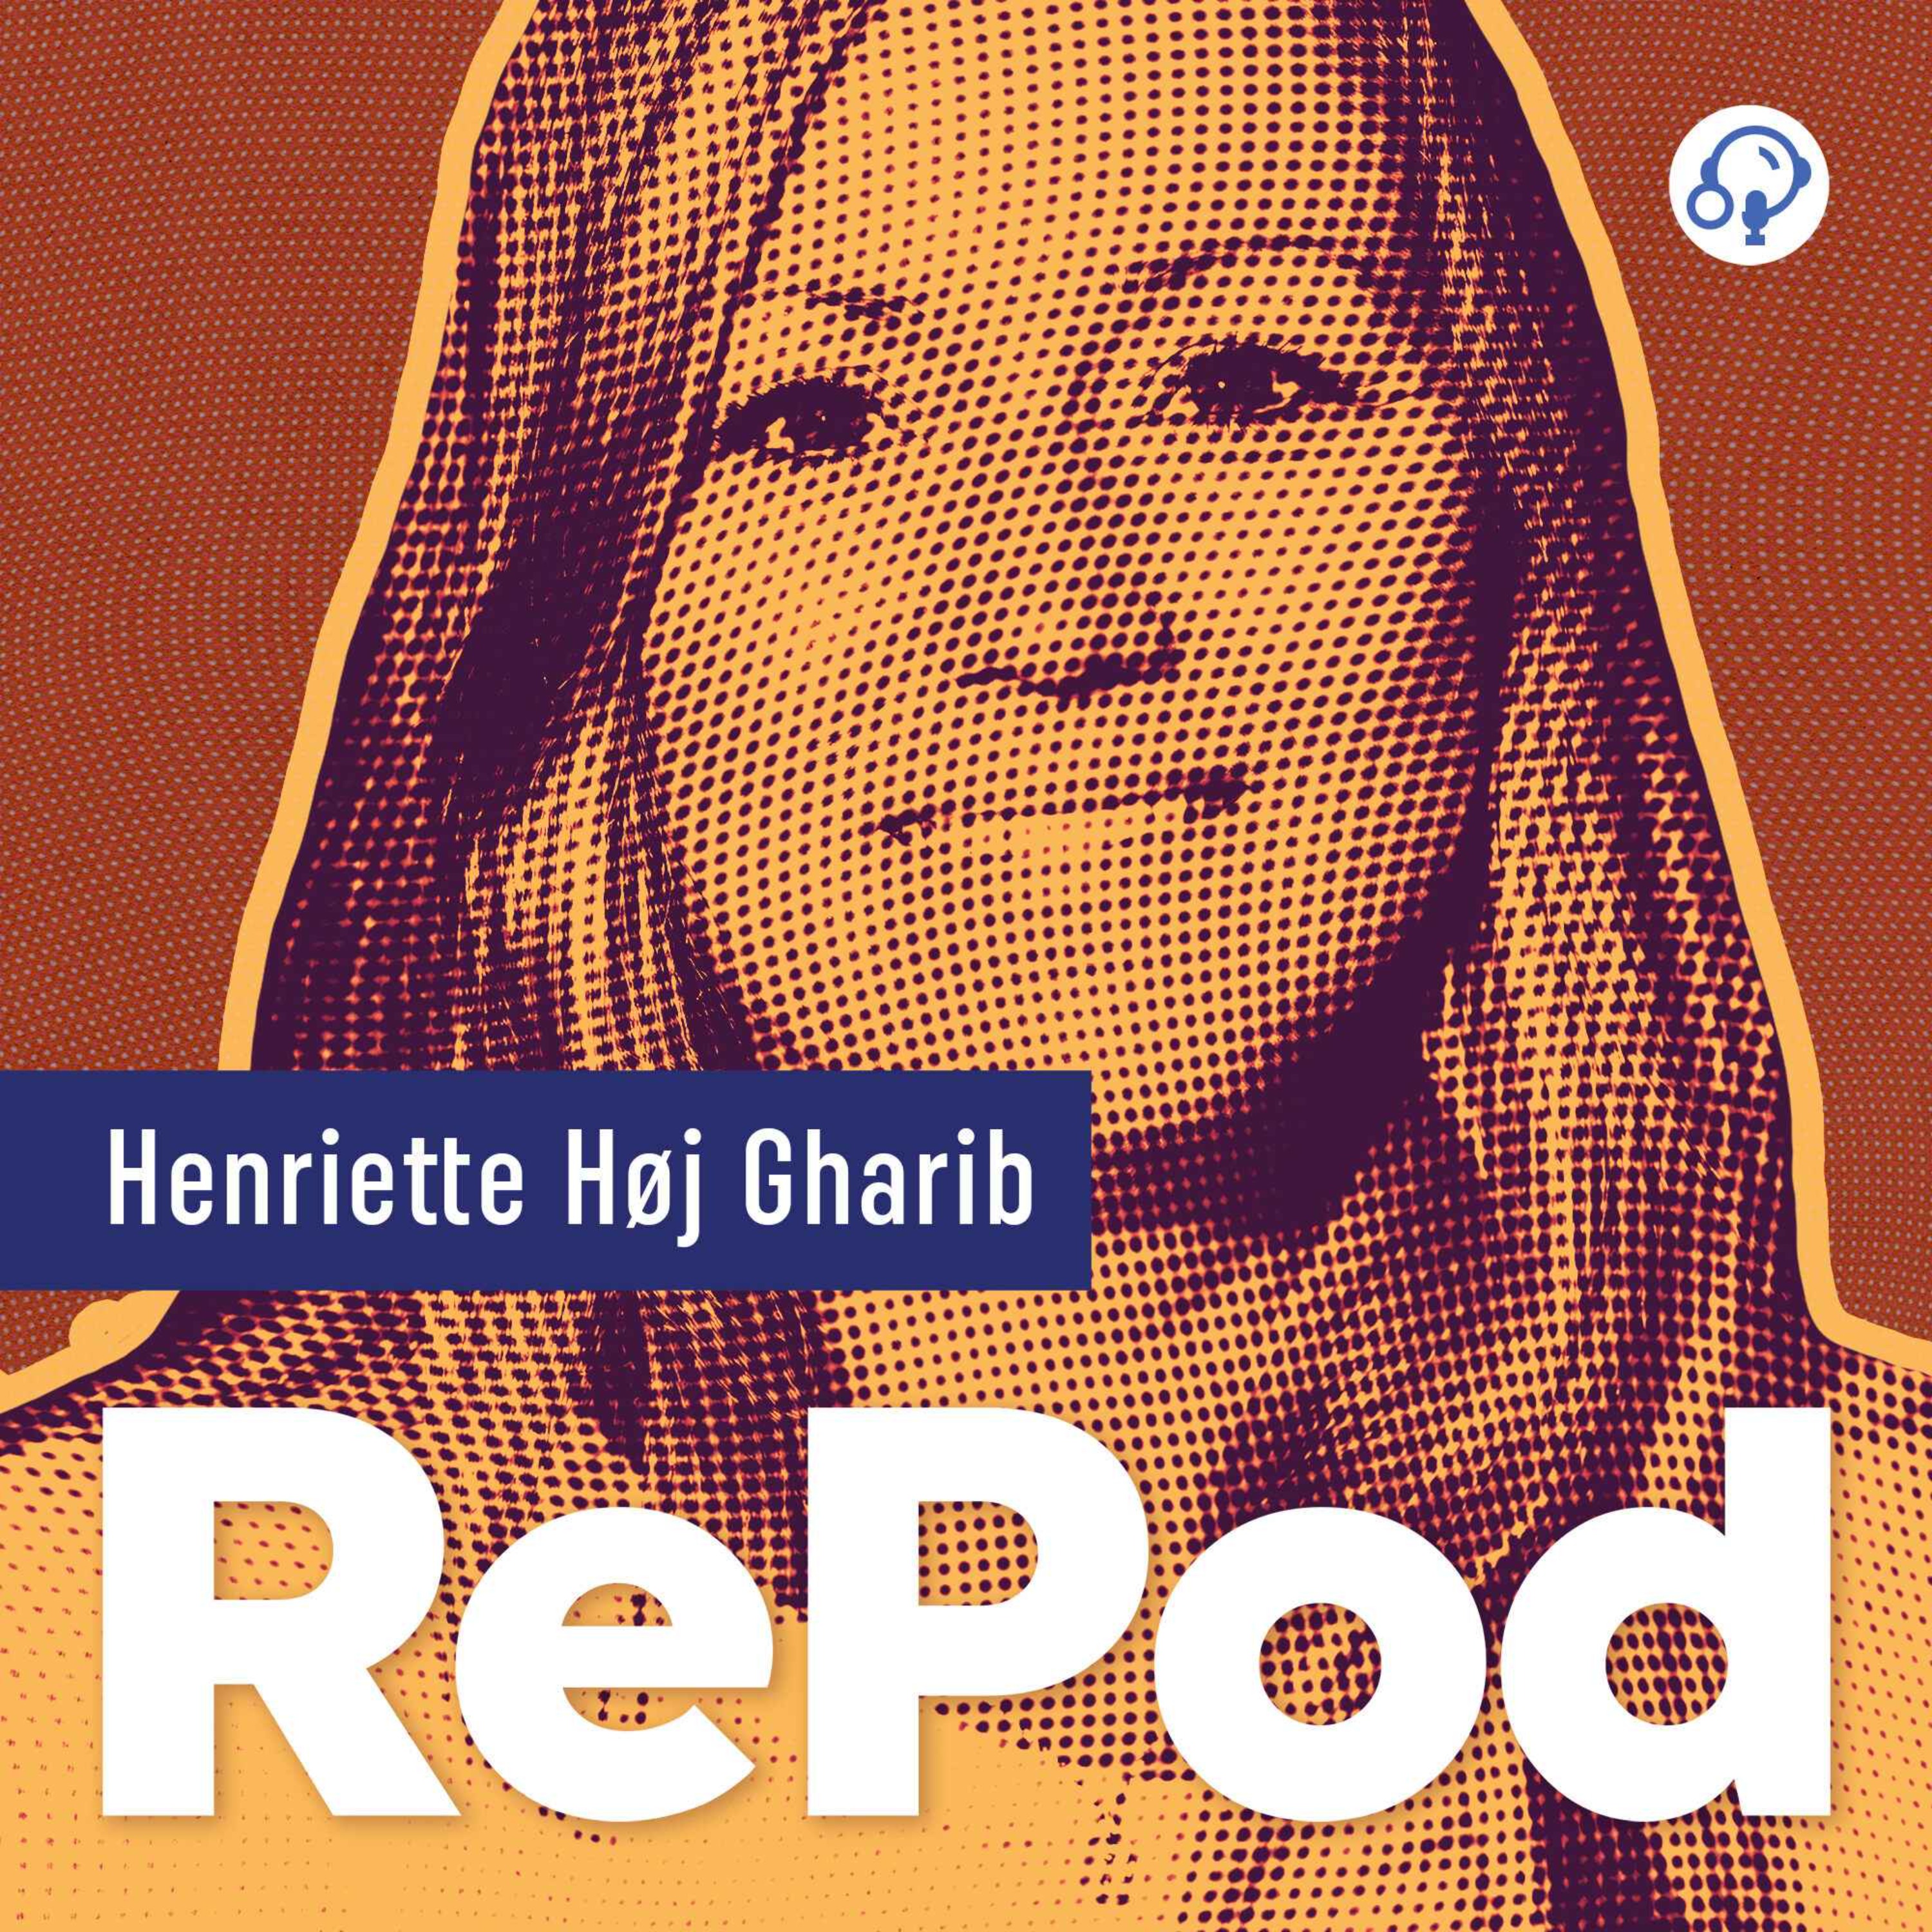 cover art for The art of remakes in podcasting. With  Henriette Høj Gharib - CEO and co-founder of Podster